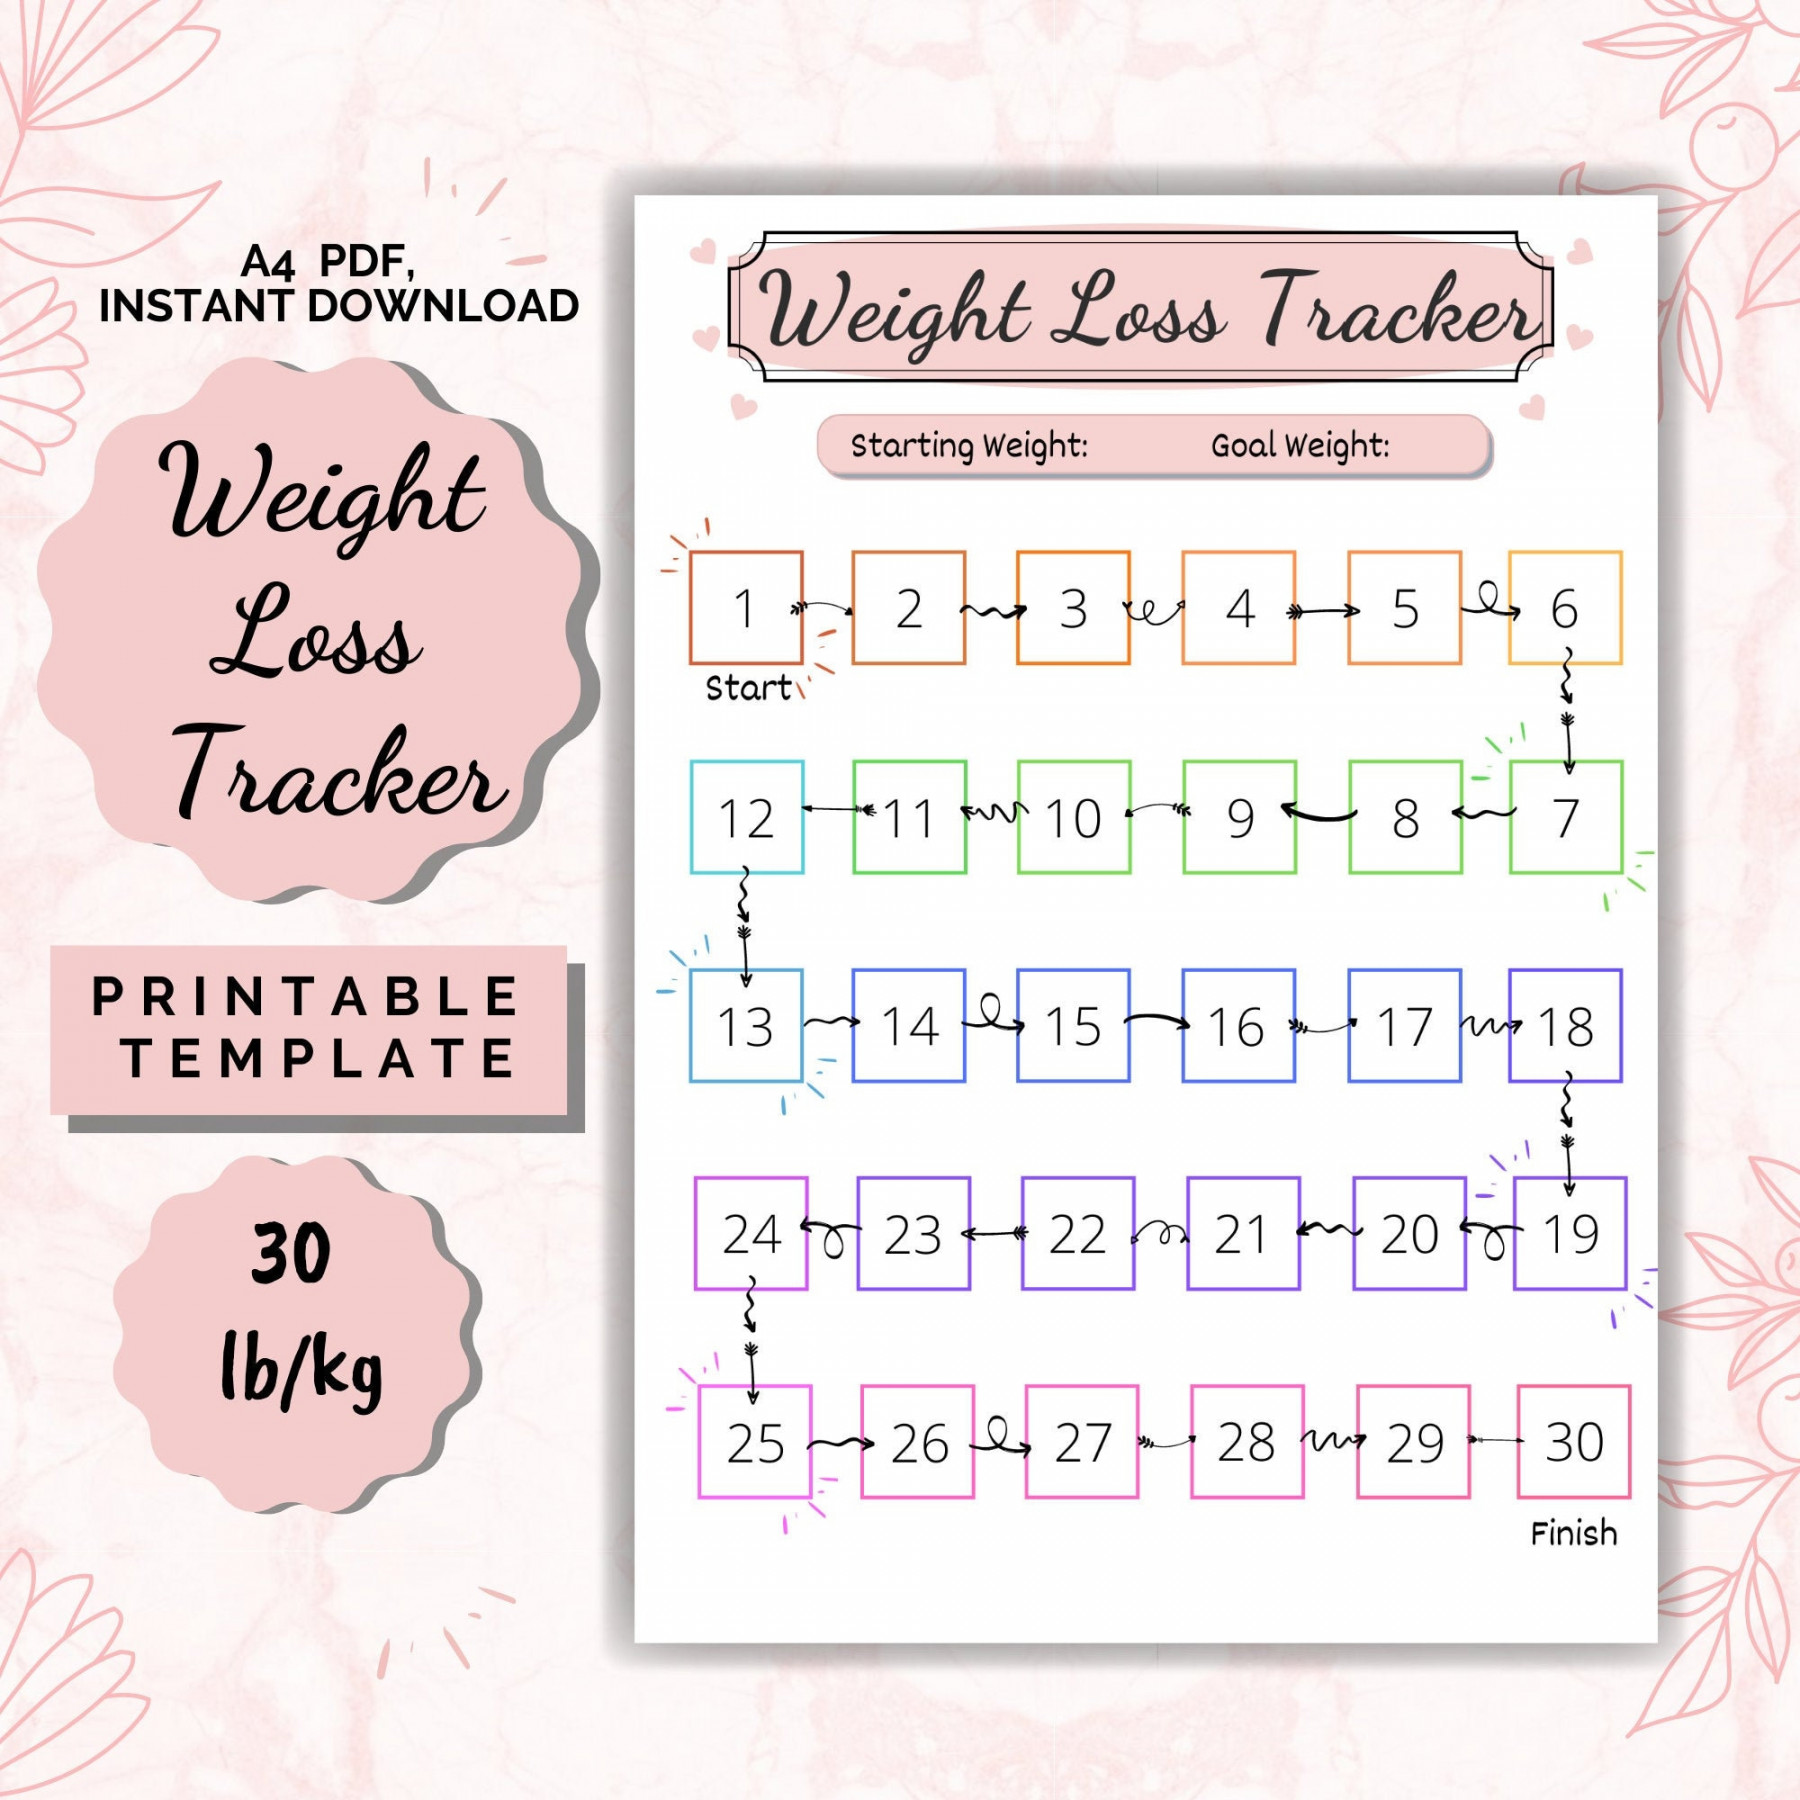 Weight Loss Tracker Printable  Lb/kg Weight Loss Chart - Etsy